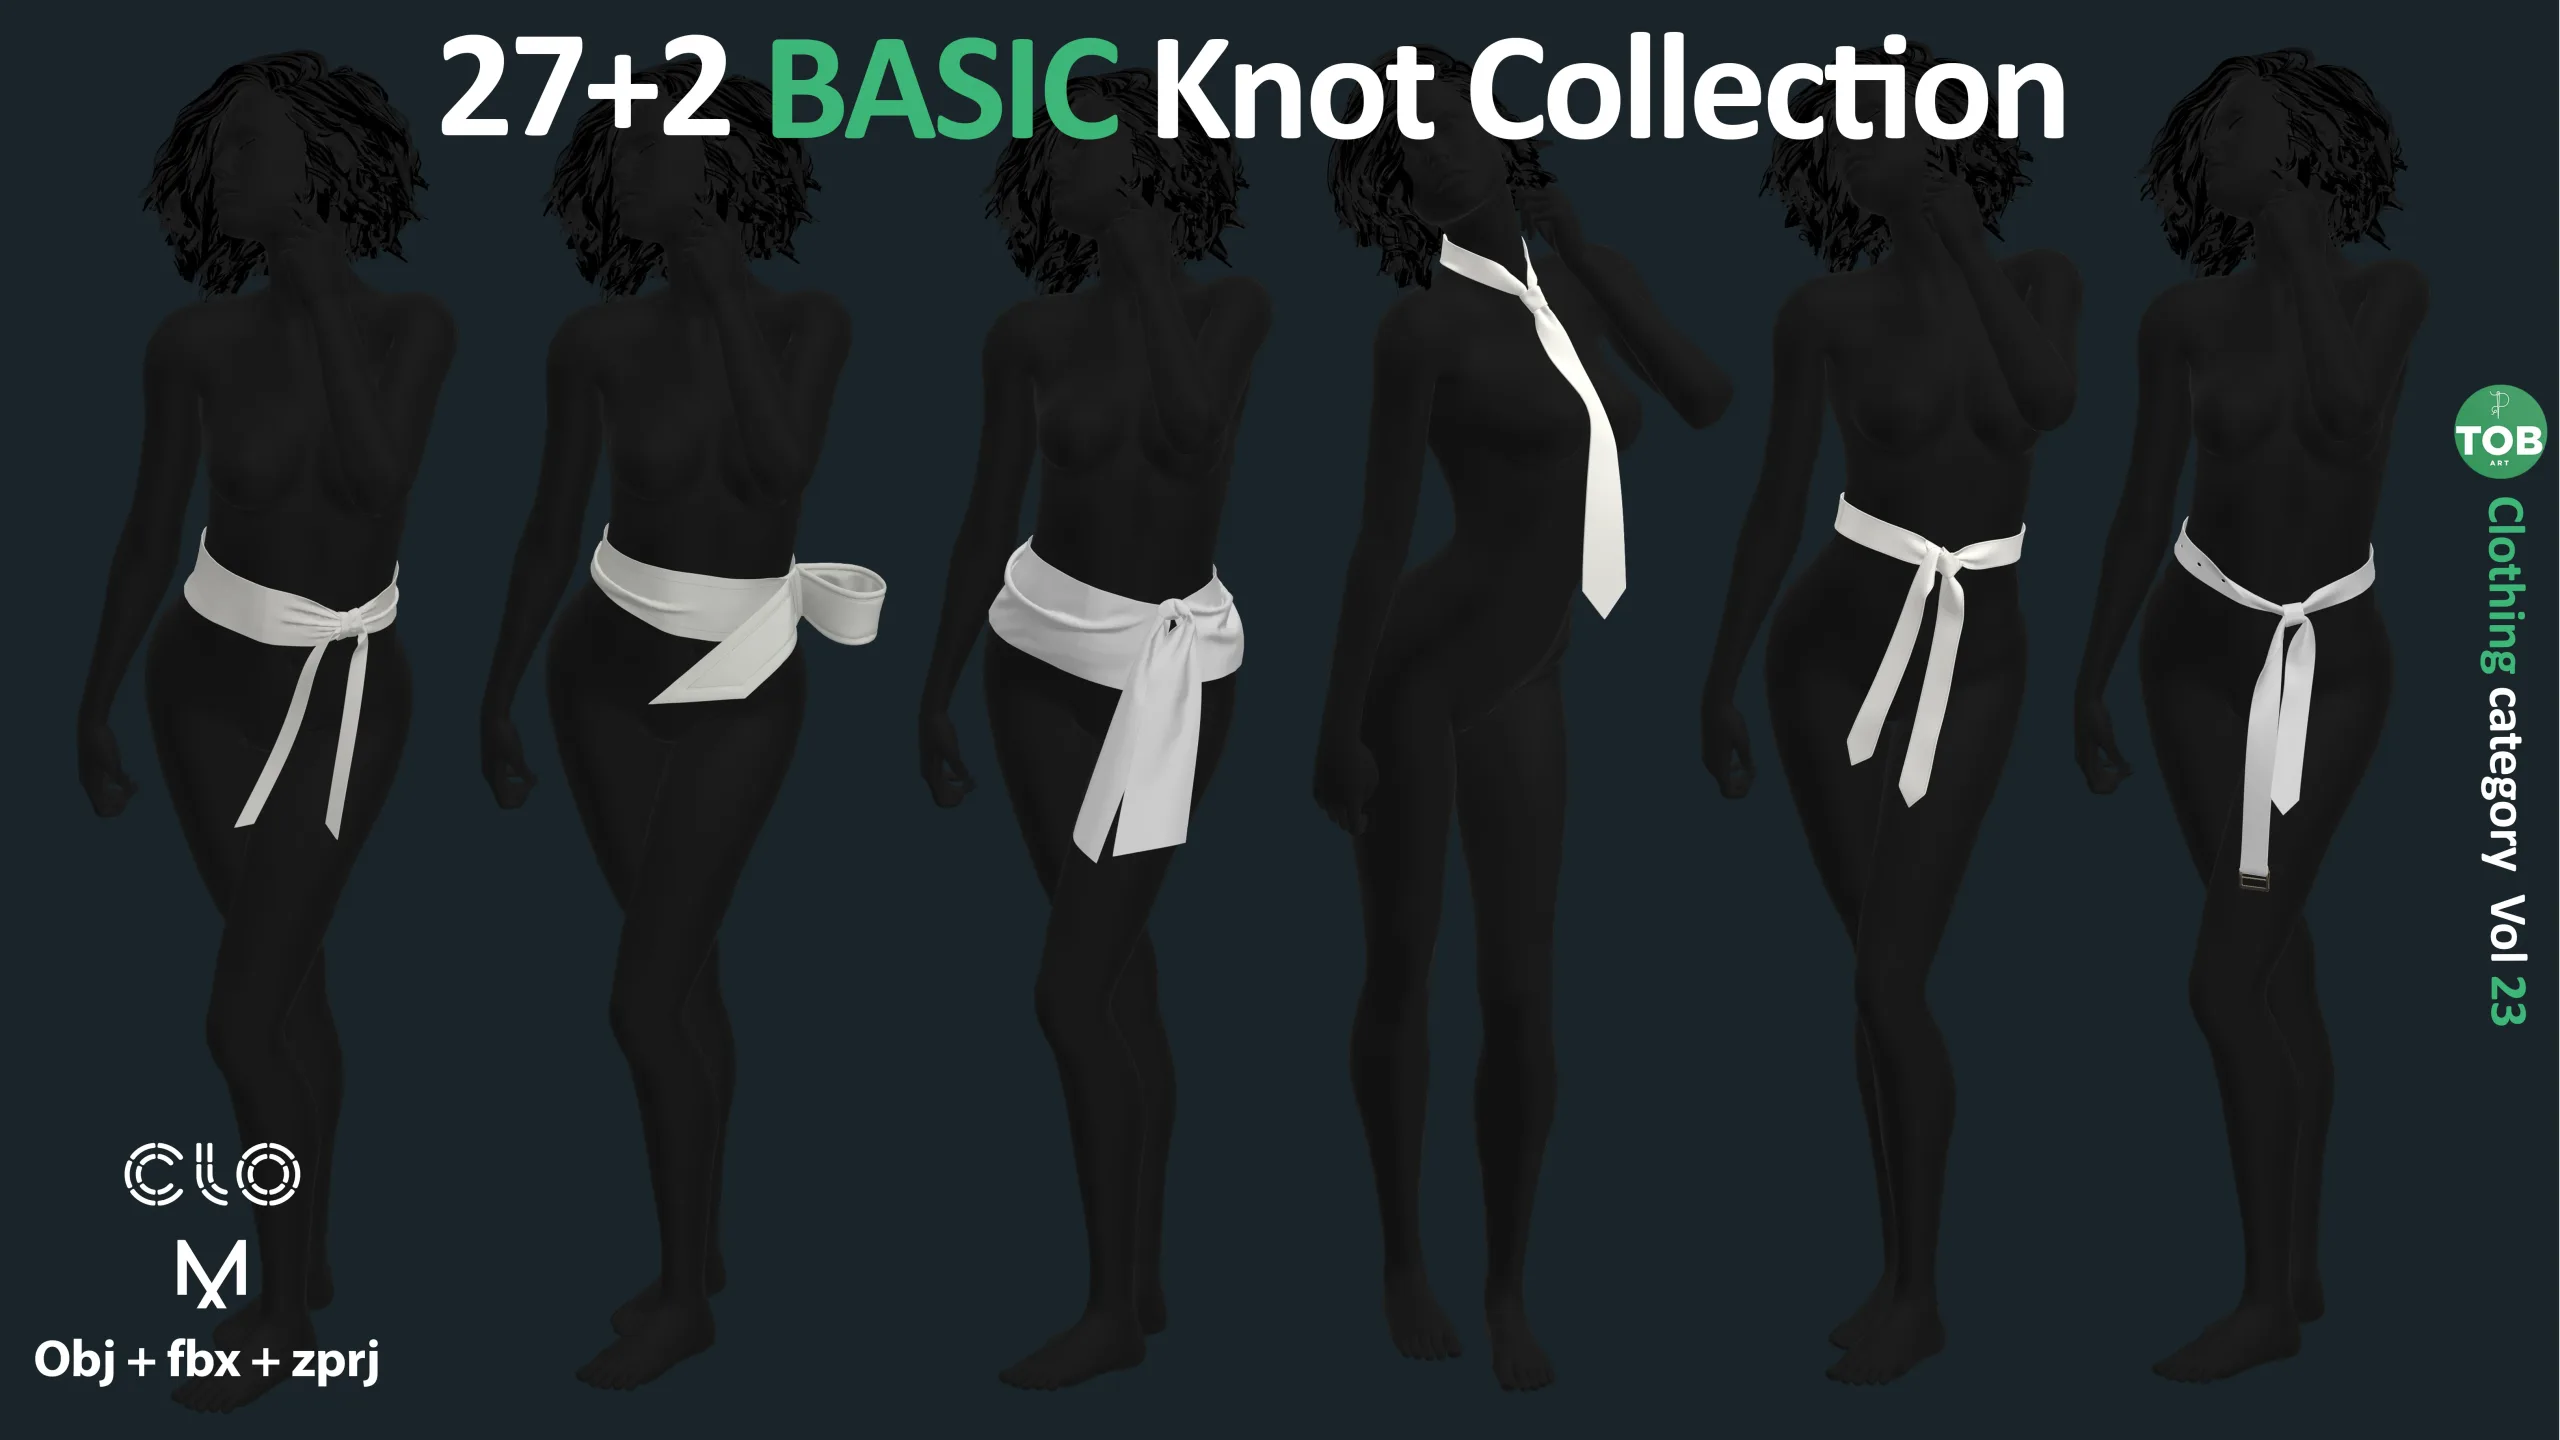 27+2 Basic Knot Collection: Diverse Pre-Made Knots for Accelerating Your Projects / ZPRJ + OBJ + FBX / Marvelous + Clo3d